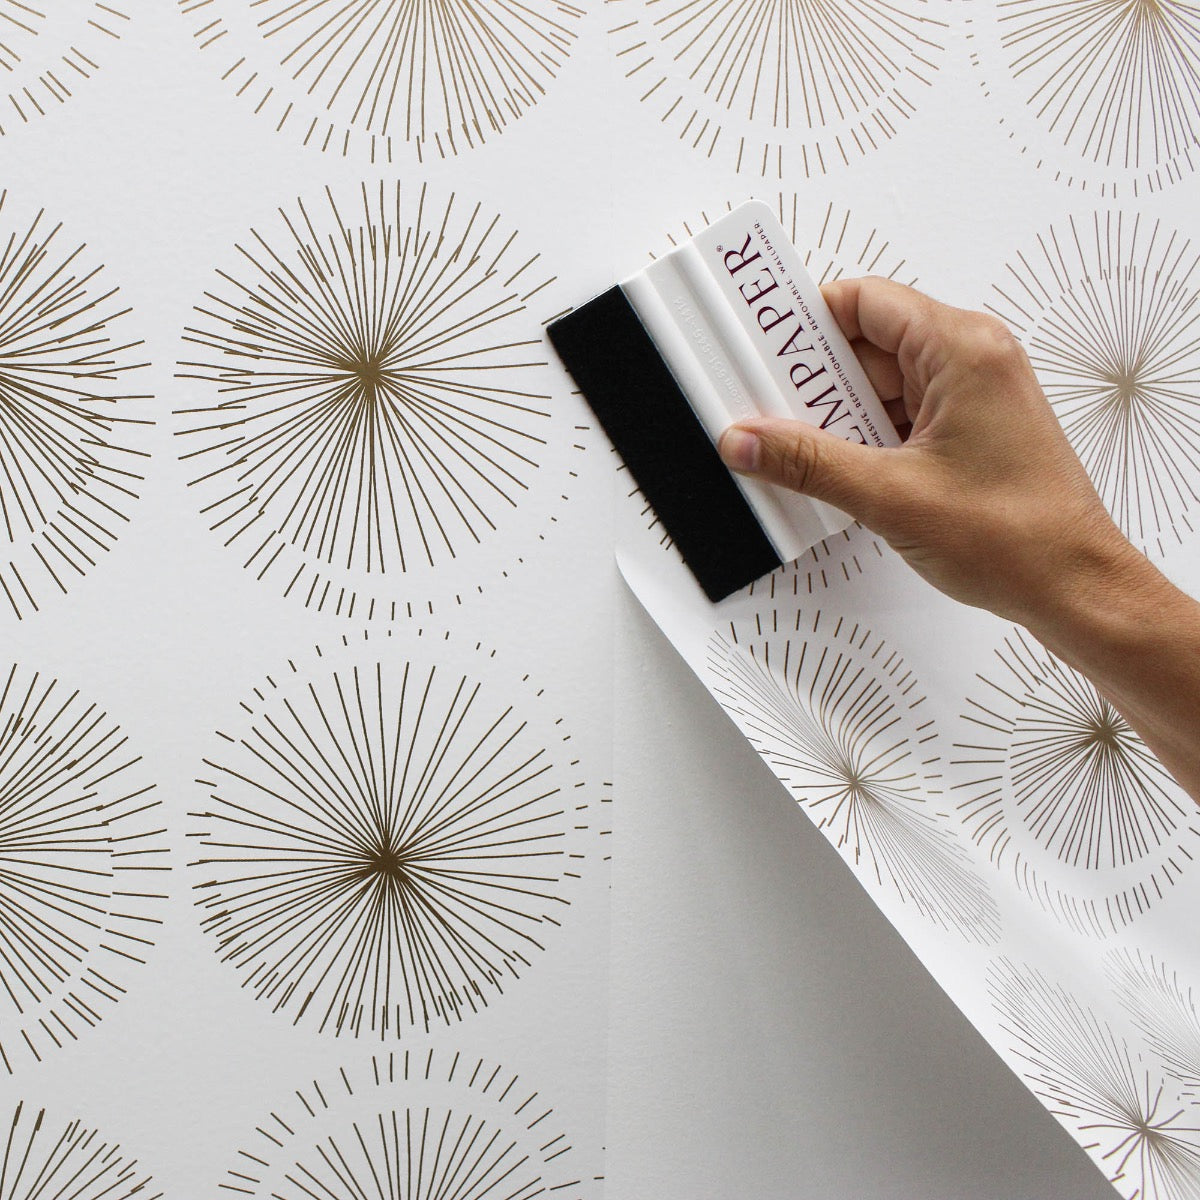 Squeegee Removable Wallpaper Tool